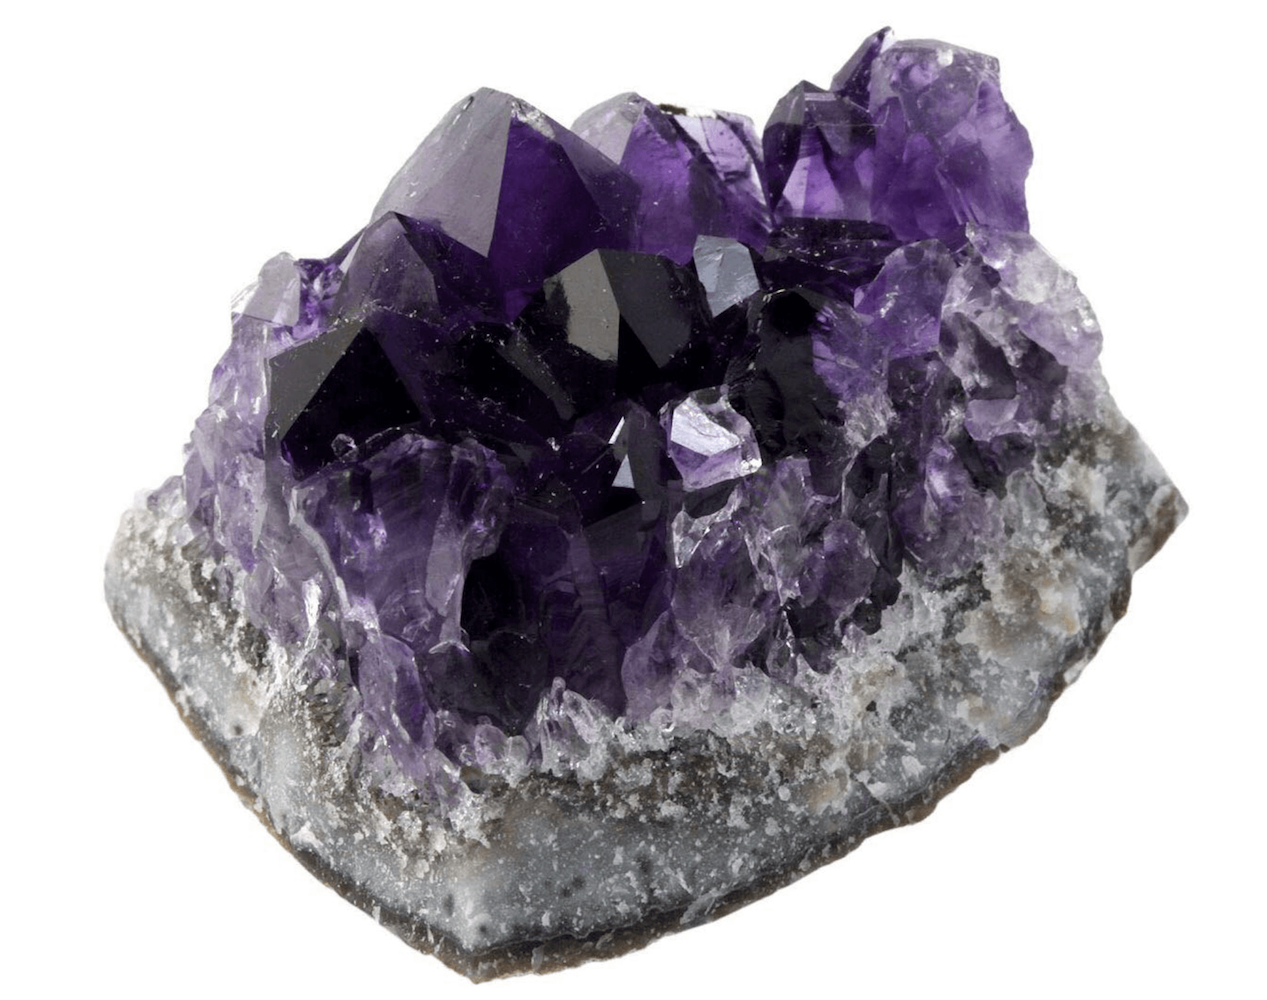 AMETHYST STONE. Natural Amethyst and Quartz Crystal Clusters, Uruguay AAA Quality. These are very high grade Amethyst Clusters with stunning color and crystallization. Shop Amethyst Stone Quartz Natural Gemstone Cluster at Magic Crystals. FREE SHIPPING AVAILABLE.